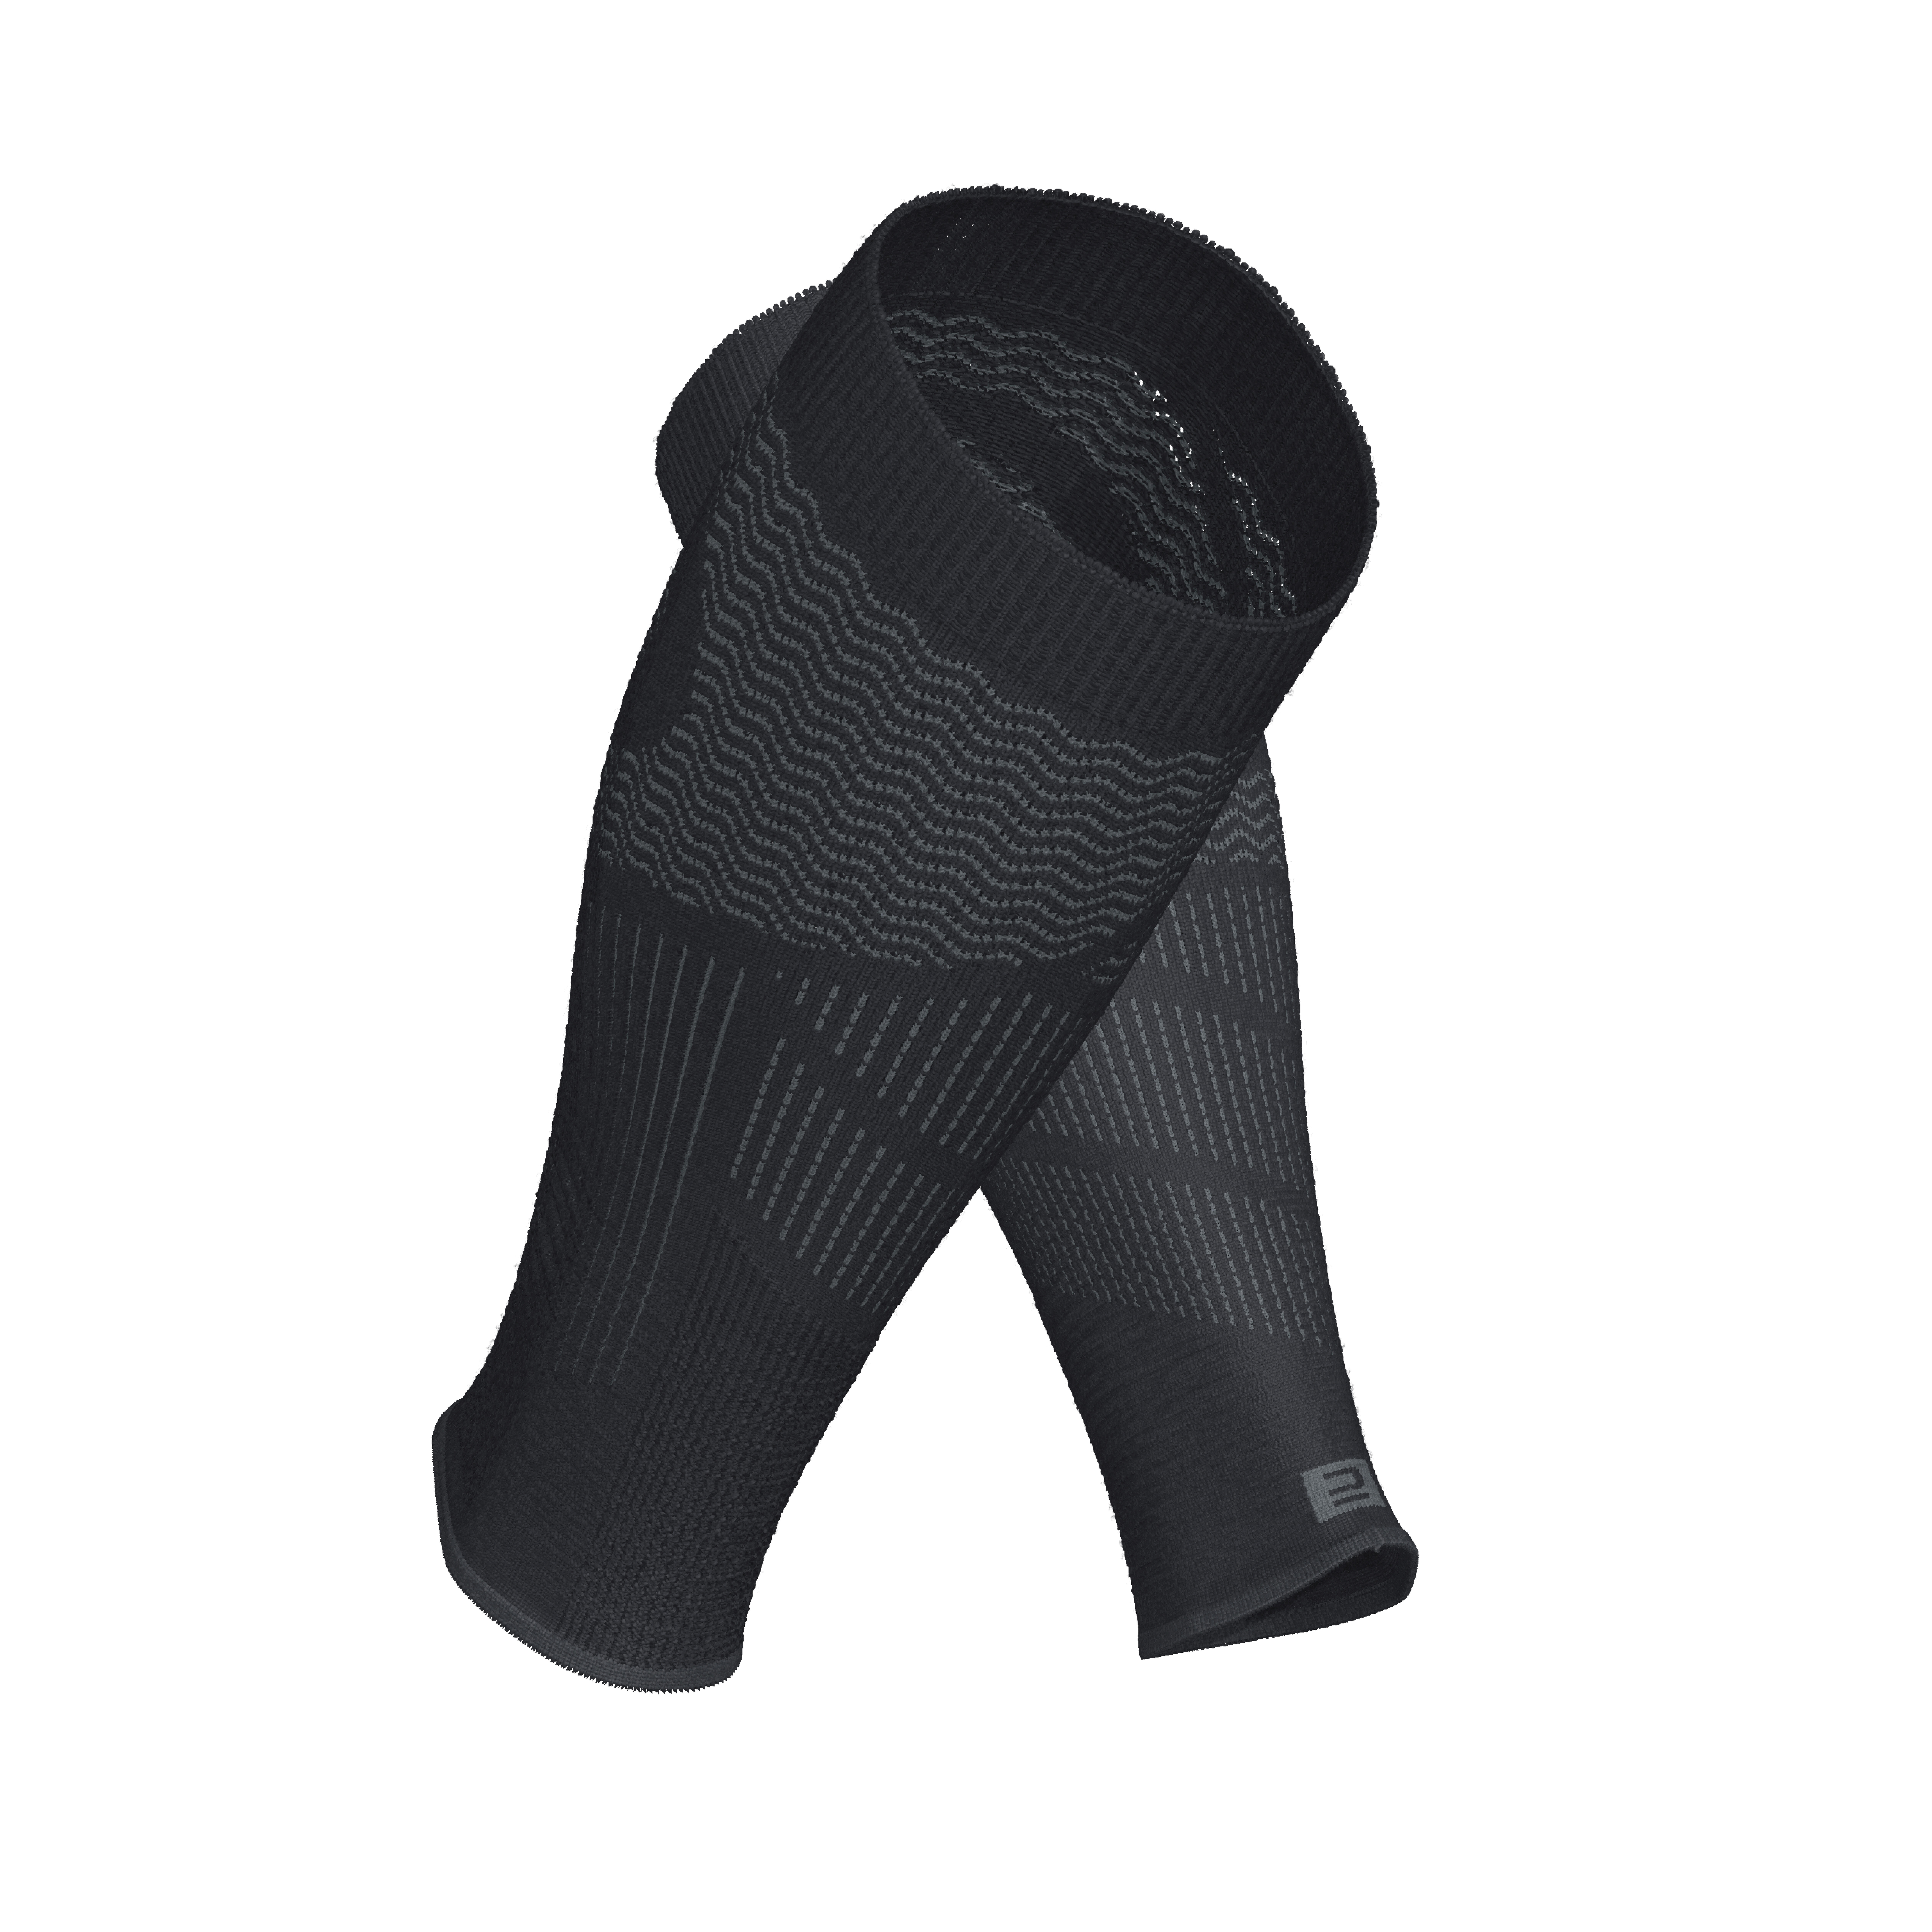 Running Compression Sleeves